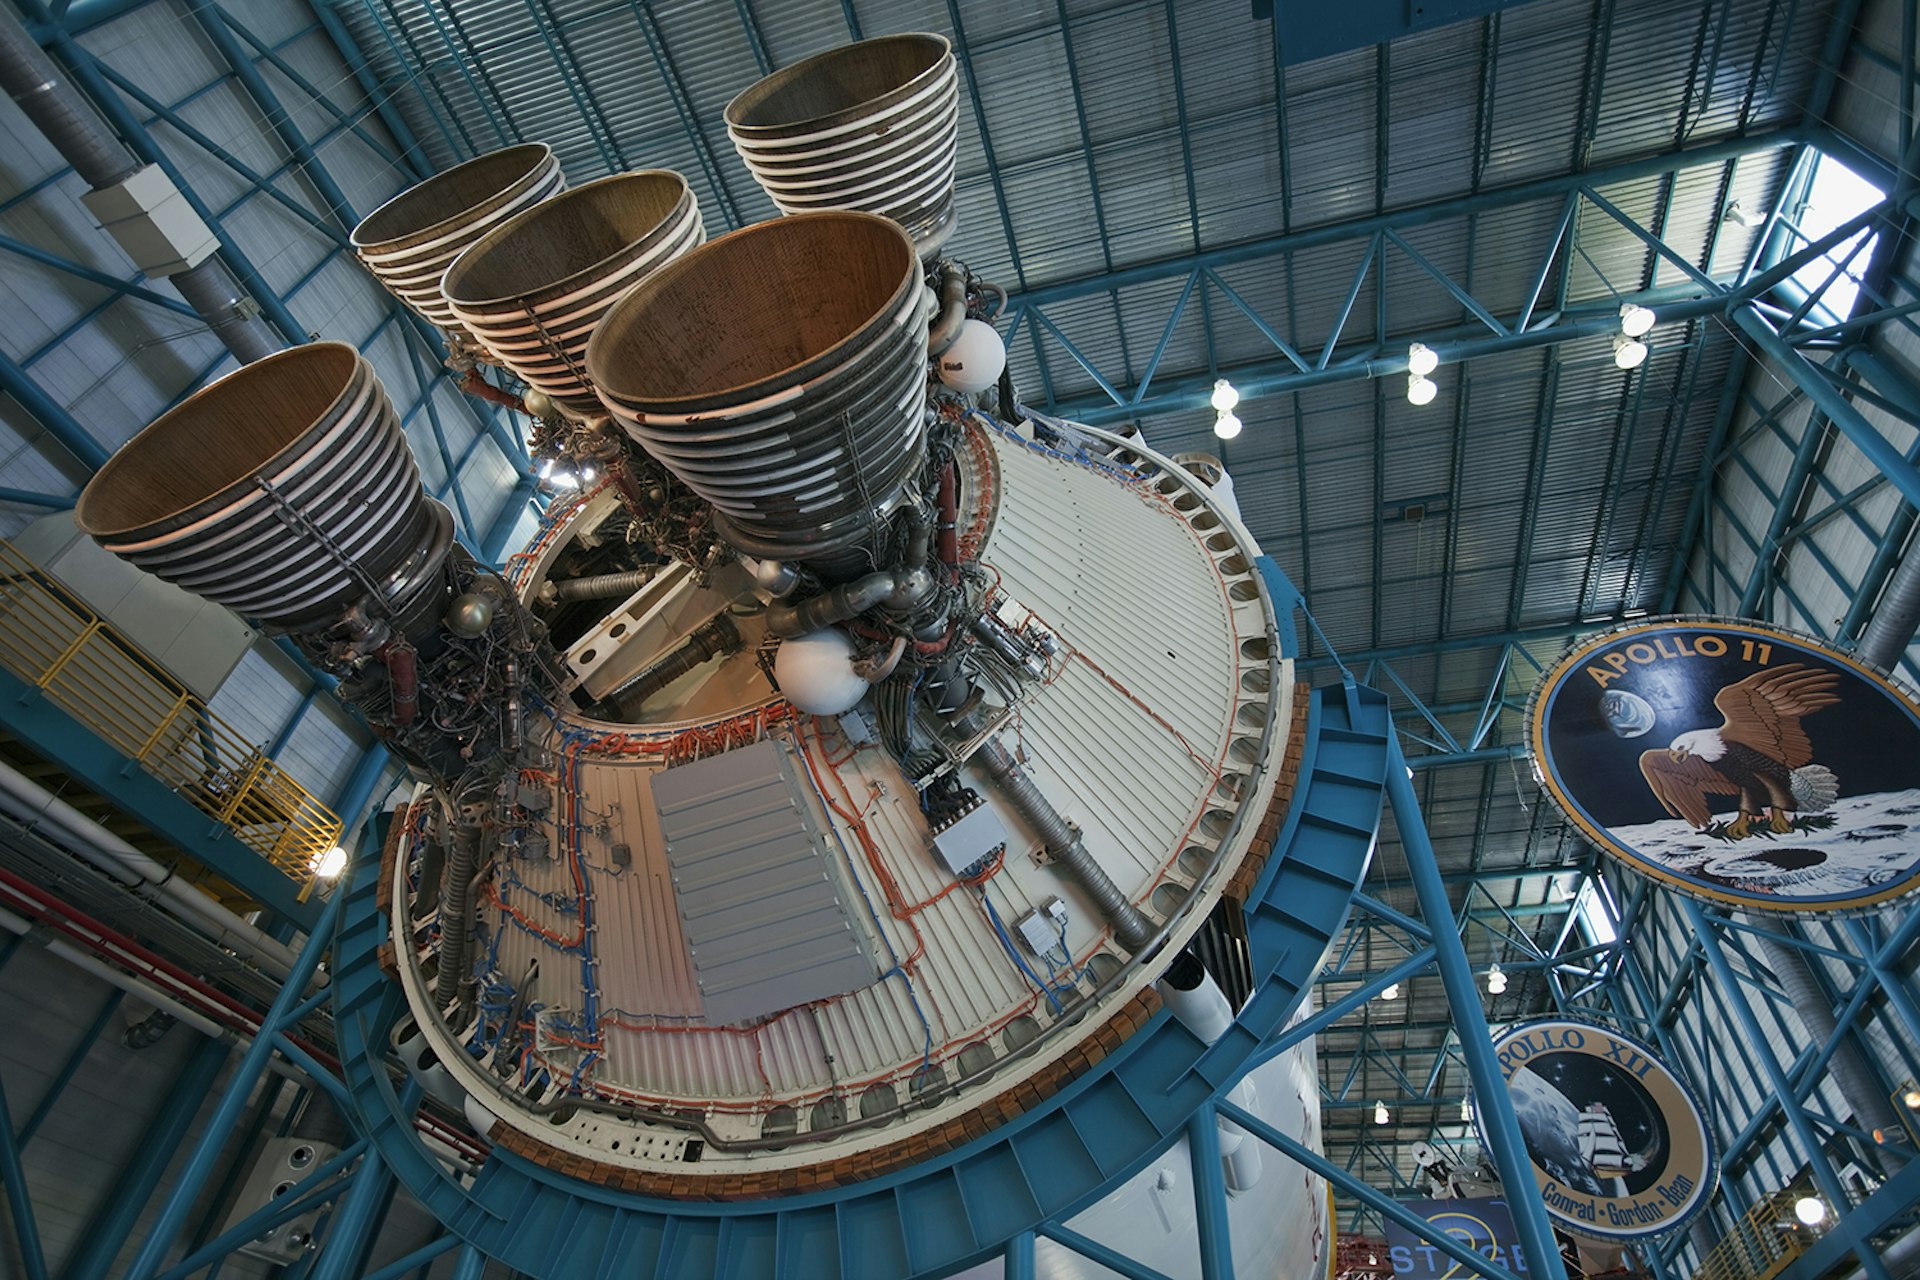 A gigantic Saturn V rocket at Kennedy Space Center. Image by  Judy Bellah / Lonely Planet Images / Getty Images